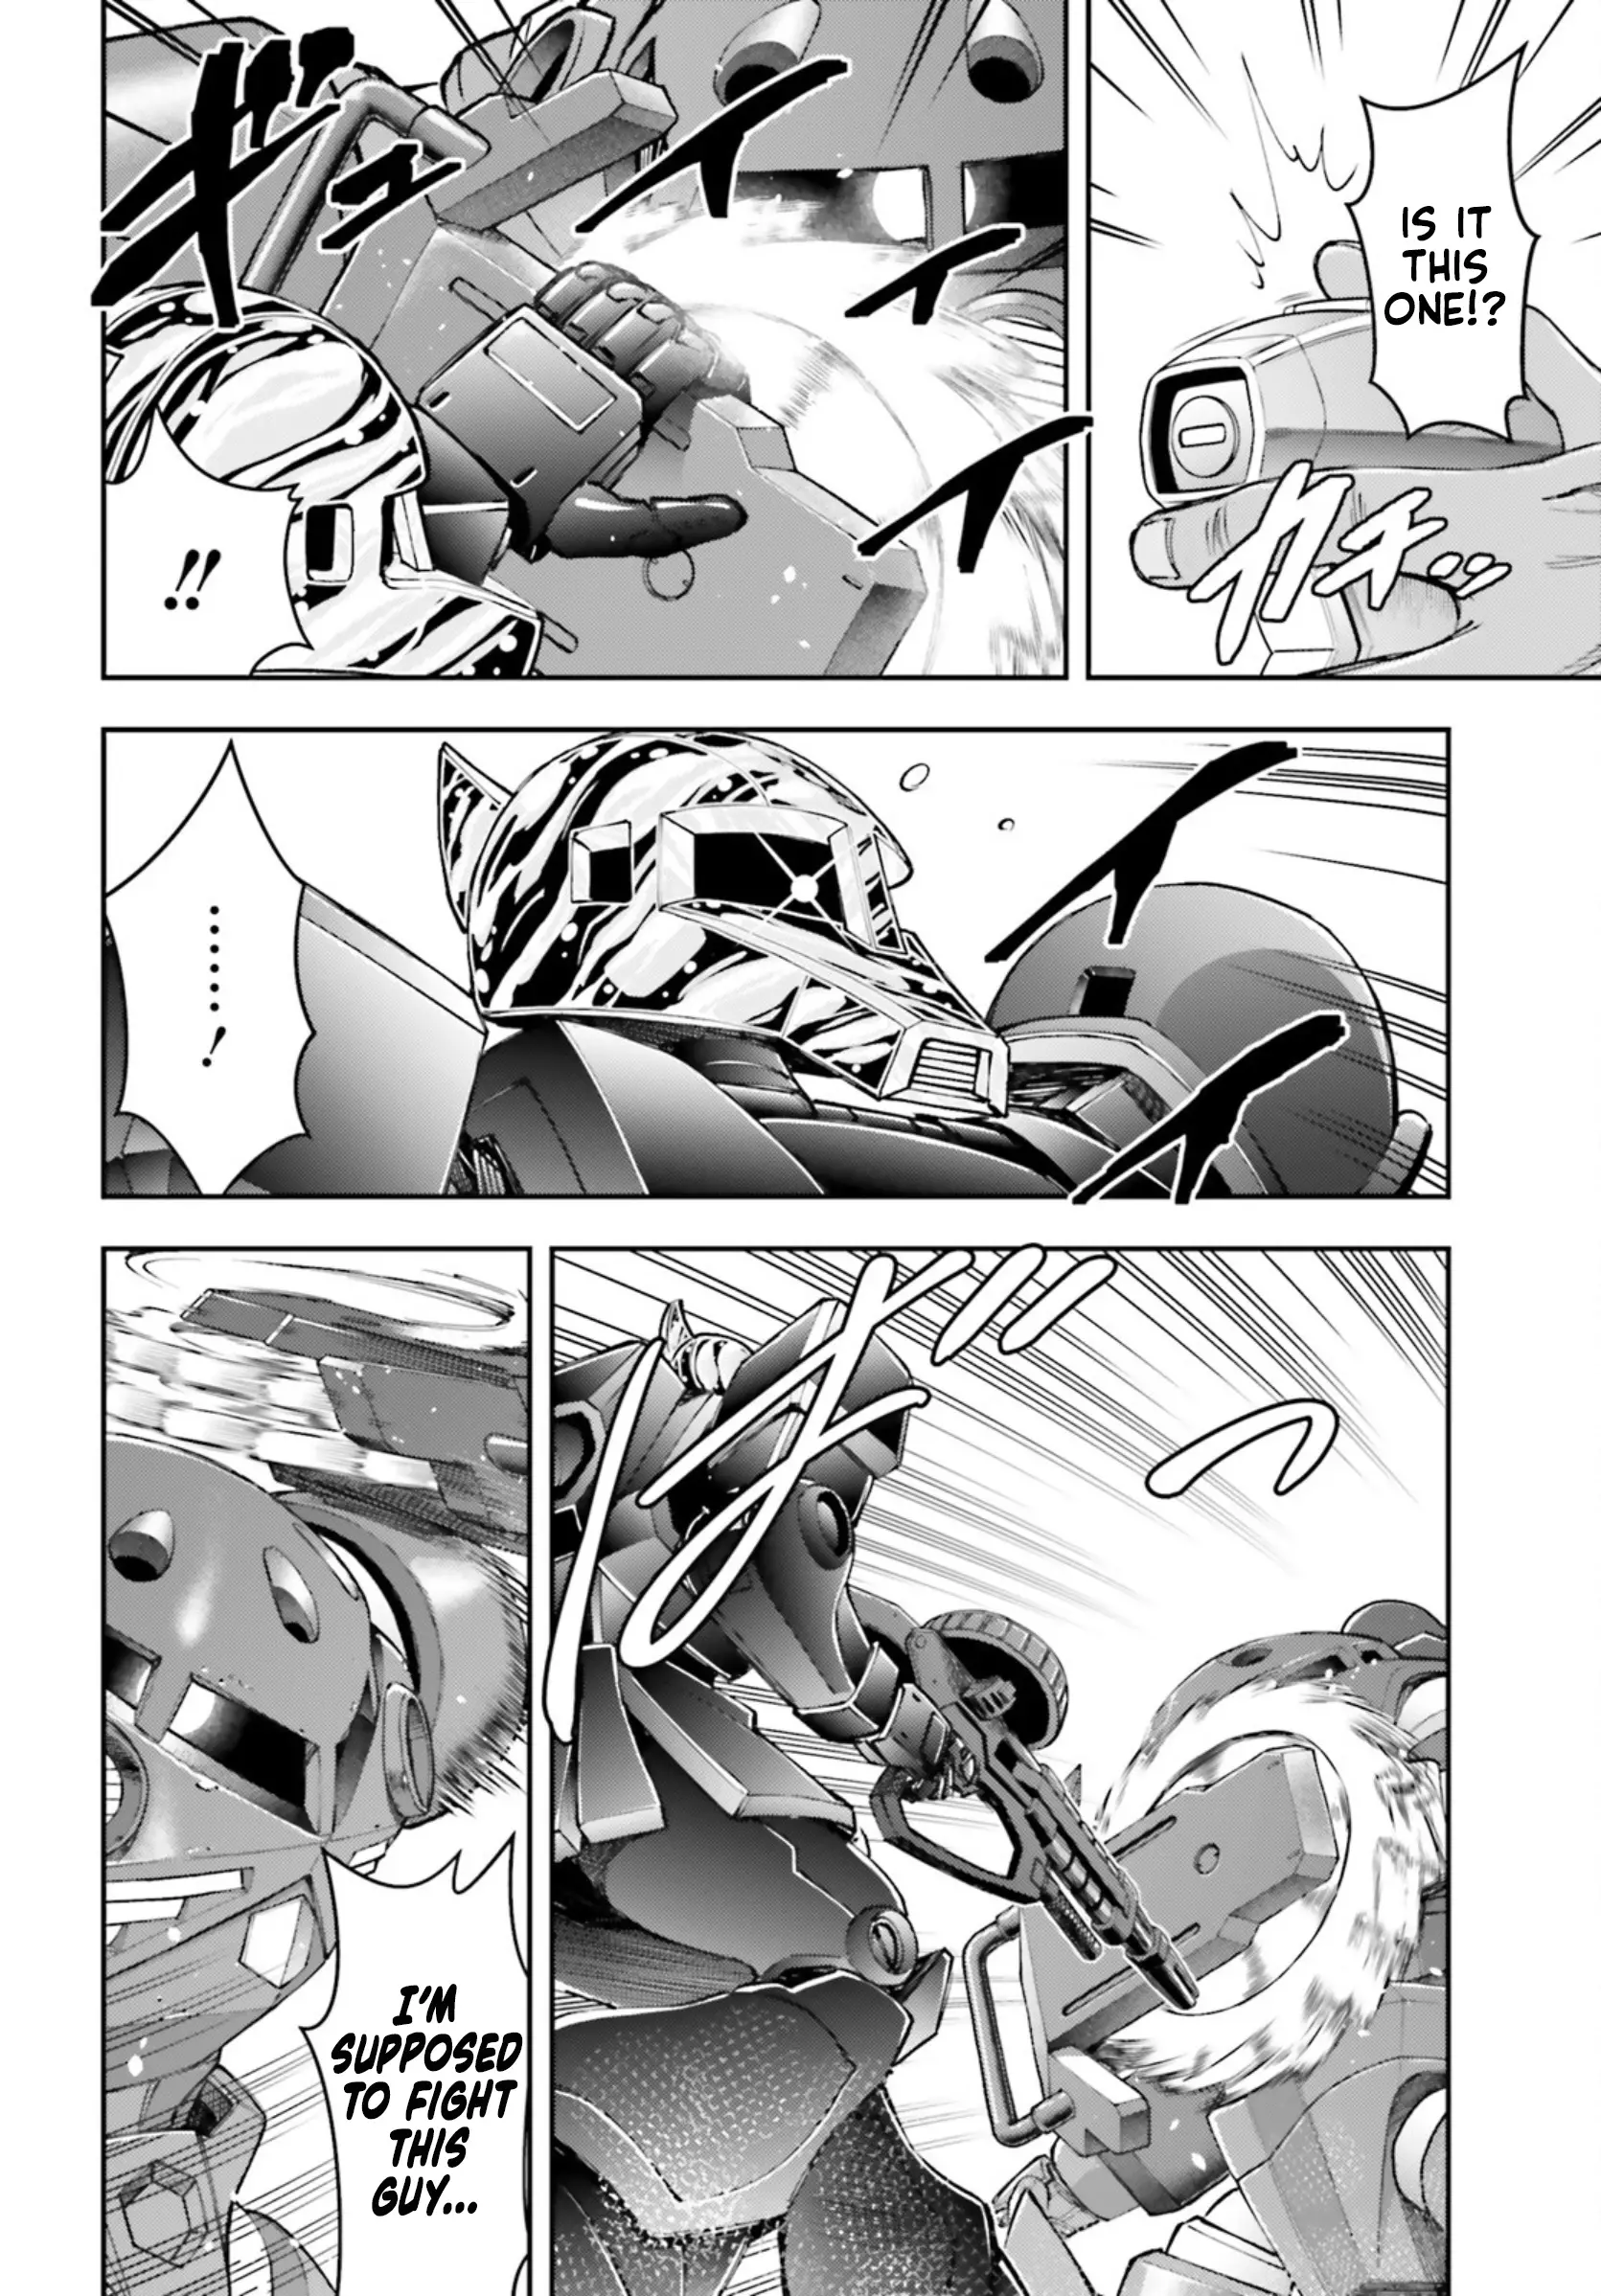 Mobile Suit Gundam: Red Giant 03Rd Ms Team - 11 page 8-f16d4ead